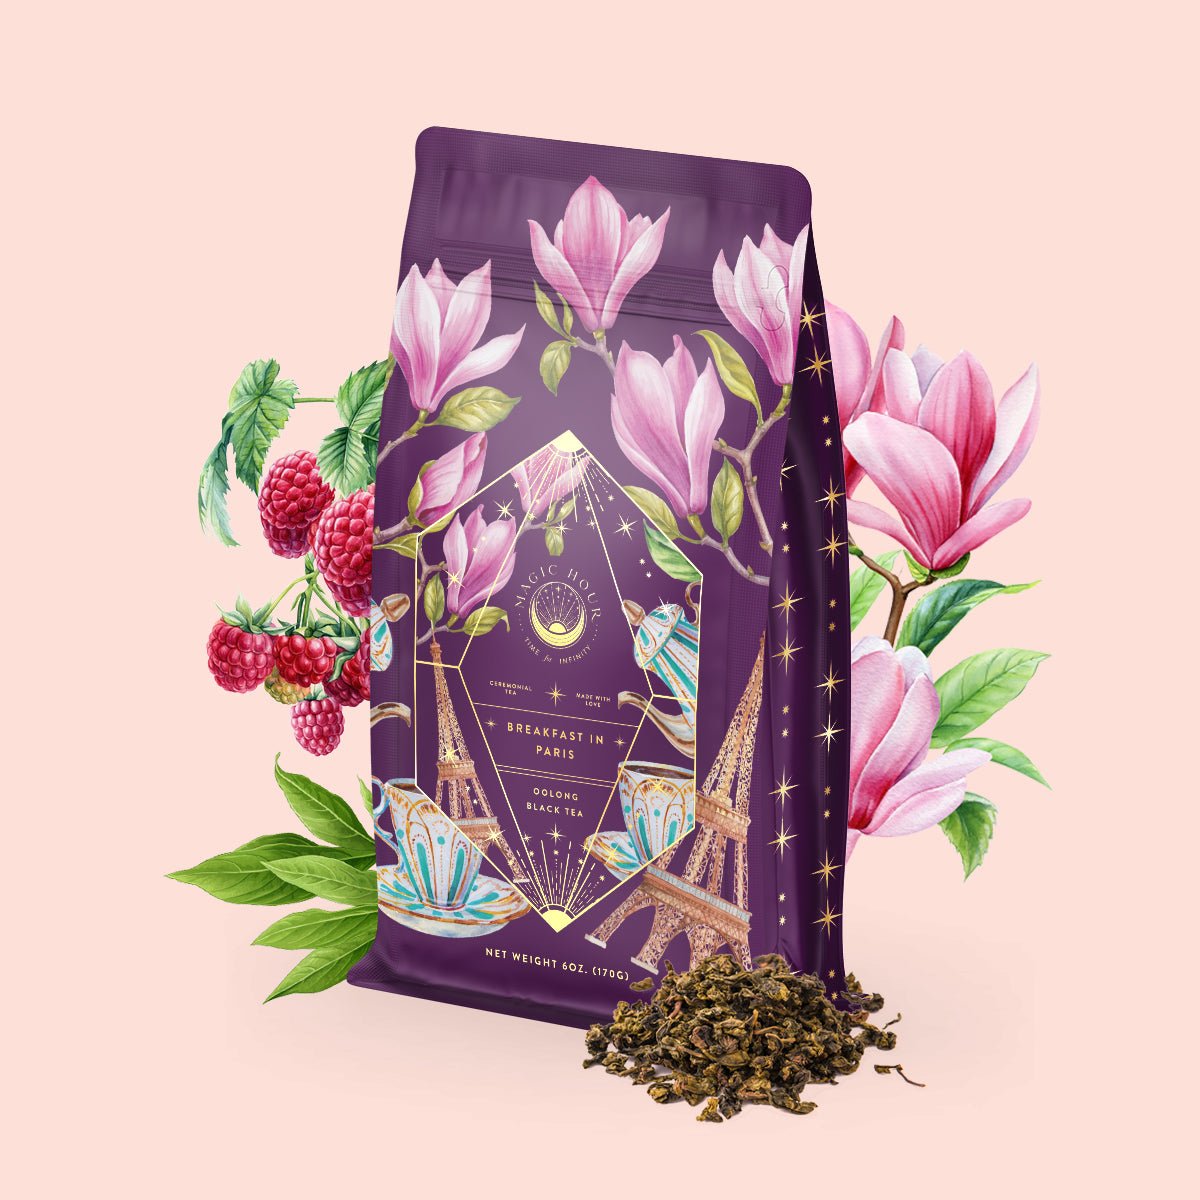 Breakfast in Paris-Oolong Black Tea Scented with Fruits & Flowers of Secret Parisian Gardens-Luxe Pouch (Refill your Jar with 75 Cups)-Magic Hour